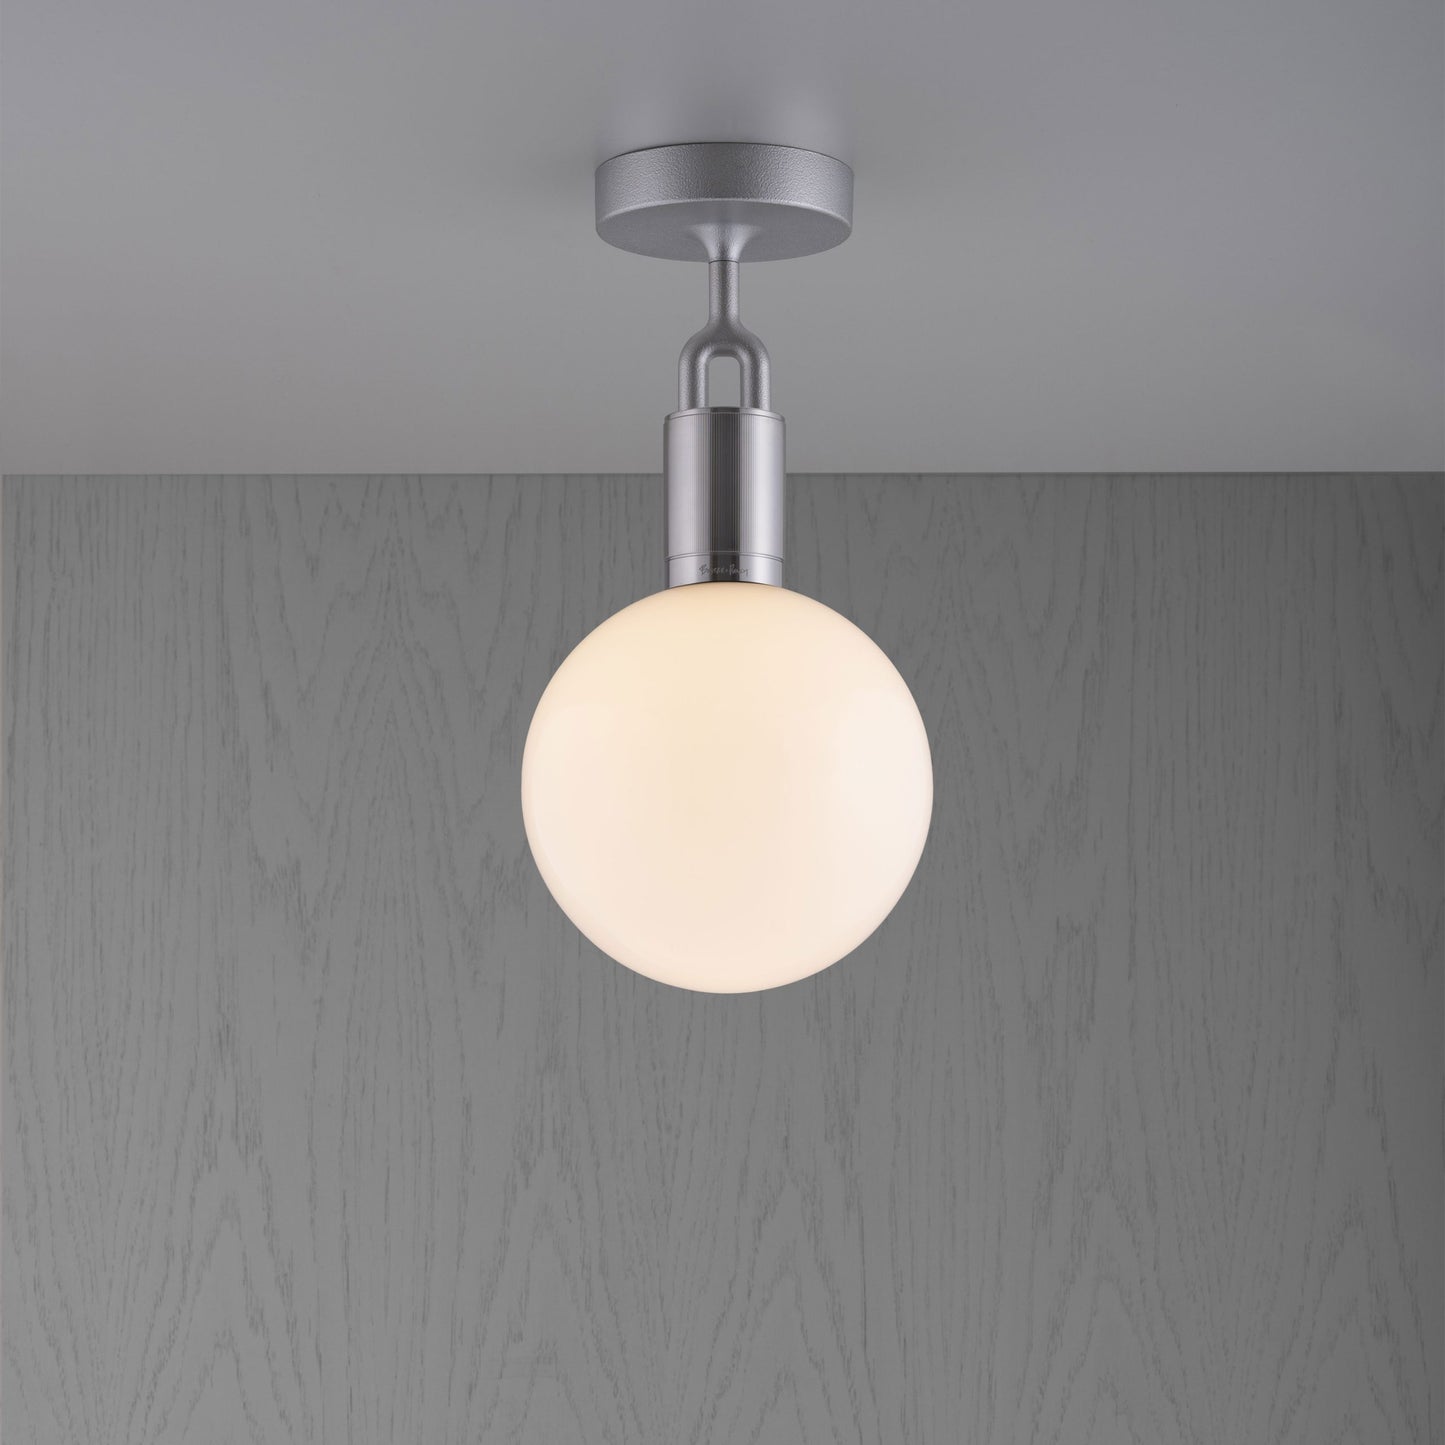 Forked Ceiling Light / Globe / Opal / Medium Steel, front view.